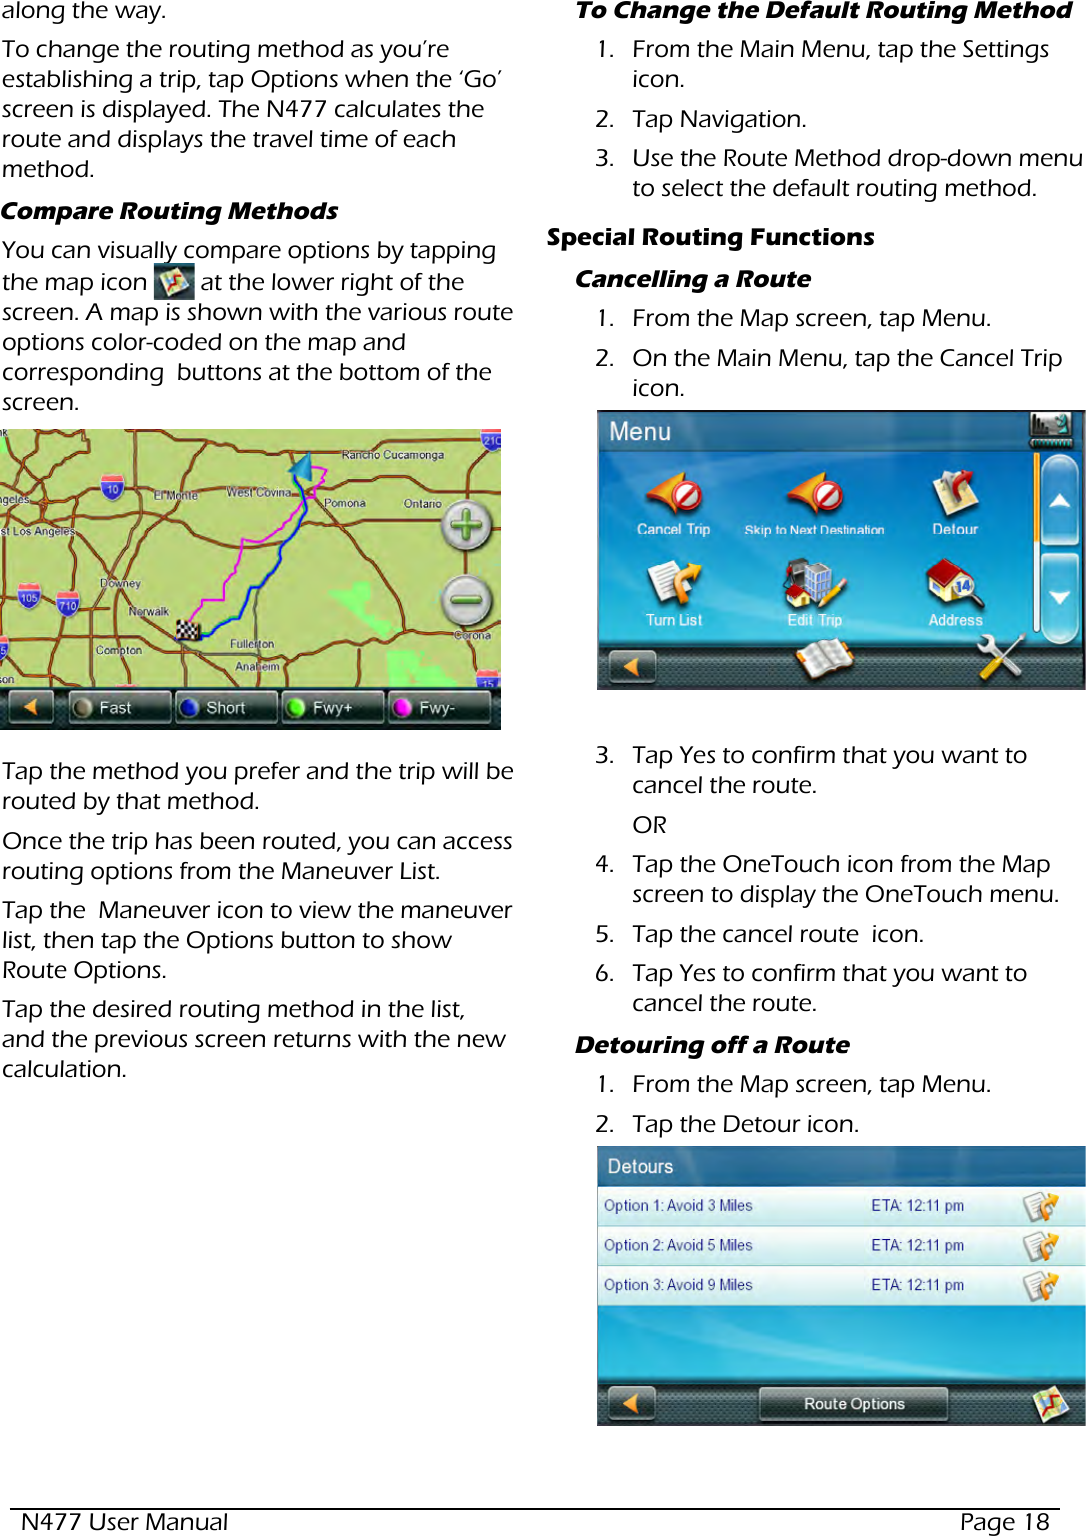 N477 User Manual  Page 18along the way.To change the routing method as you’re establishing a trip, tap Options when the ‘Go’ screen is displayed. The N477 calculates the route and displays the travel time of each method. Compare Routing MethodsYou can visually compare options by tapping the map icon   at the lower right of the screen. A map is shown with the various route options color-coded on the map and corresponding  buttons at the bottom of the screen.   Tap the method you prefer and the trip will be routed by that method.Once the trip has been routed, you can access routing options from the Maneuver List.Tap the  Maneuver icon to view the maneuver list, then tap the Options button to show Route Options. Tap the desired routing method in the list, and the previous screen returns with the new calculation.To Change the Default Routing Method 1.  From the Main Menu, tap the Settings icon.2.  Tap Navigation.3.  Use the Route Method drop-down menu to select the default routing method.Special Routing FunctionsCancelling a Route1.  From the Map screen, tap Menu.2.  On the Main Menu, tap the Cancel Trip  icon.3.  Tap Yes to confirm that you want to cancel the route.   OR4.  Tap the OneTouch icon from the Map screen to display the OneTouch menu.5.  Tap the cancel route  icon.6.  Tap Yes to confirm that you want to cancel the route.  Detouring off a Route1.  From the Map screen, tap Menu.2.  Tap the Detour icon.  